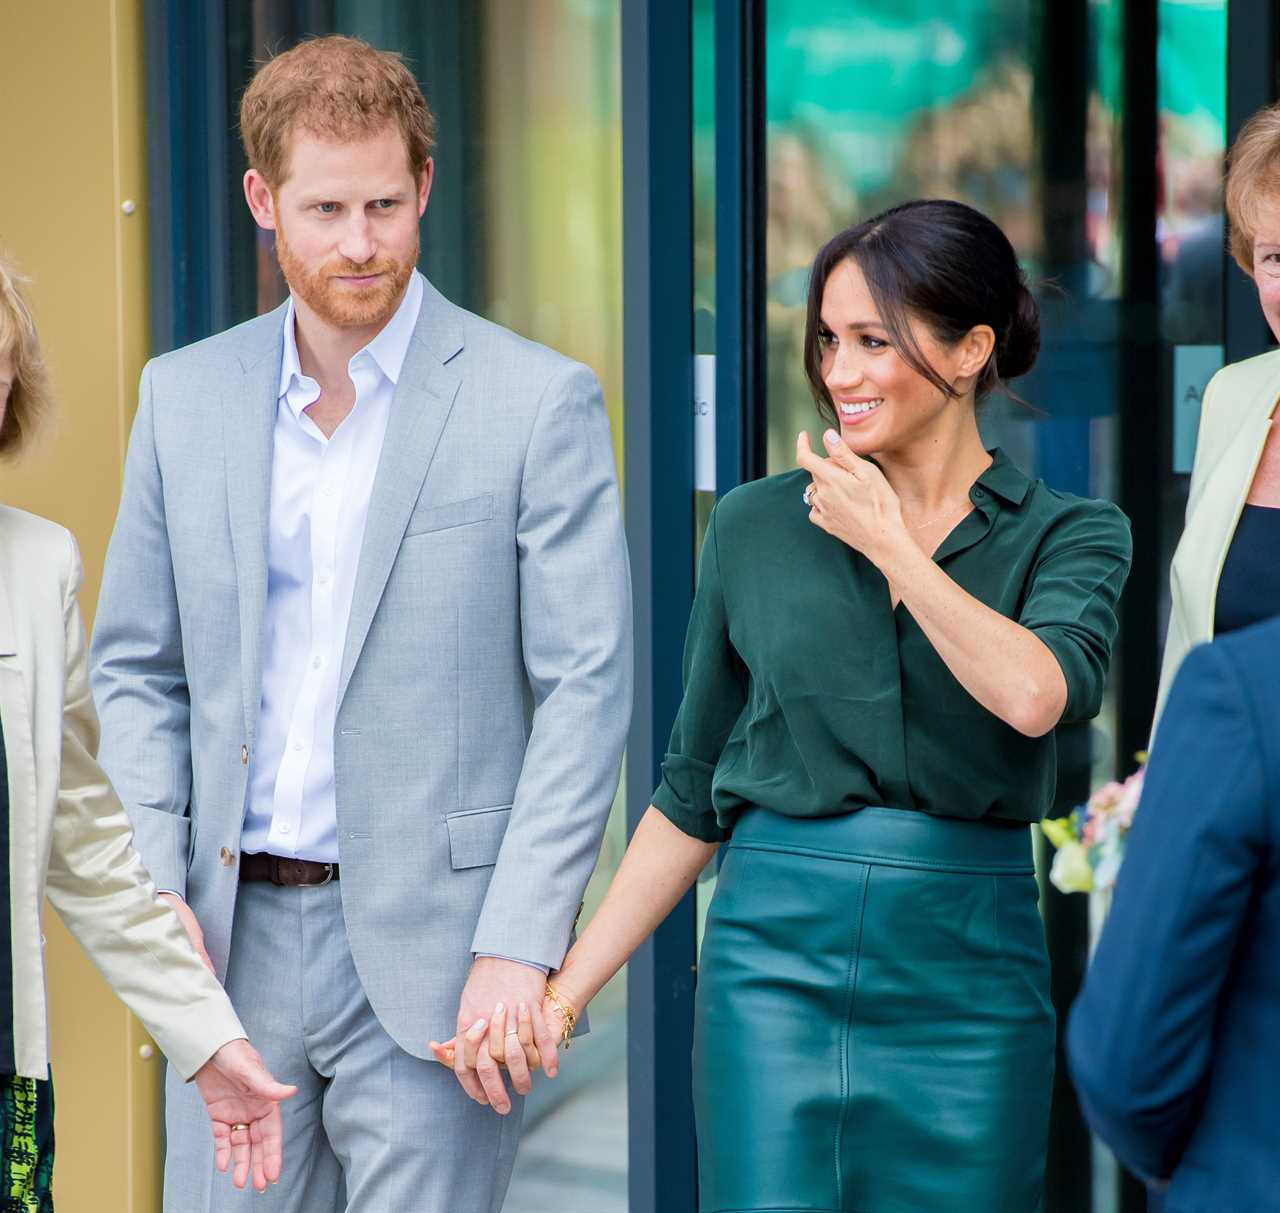 Prince Harry & Meghan Markle have a secret ritual to communicating how they feel without words, says body language pro